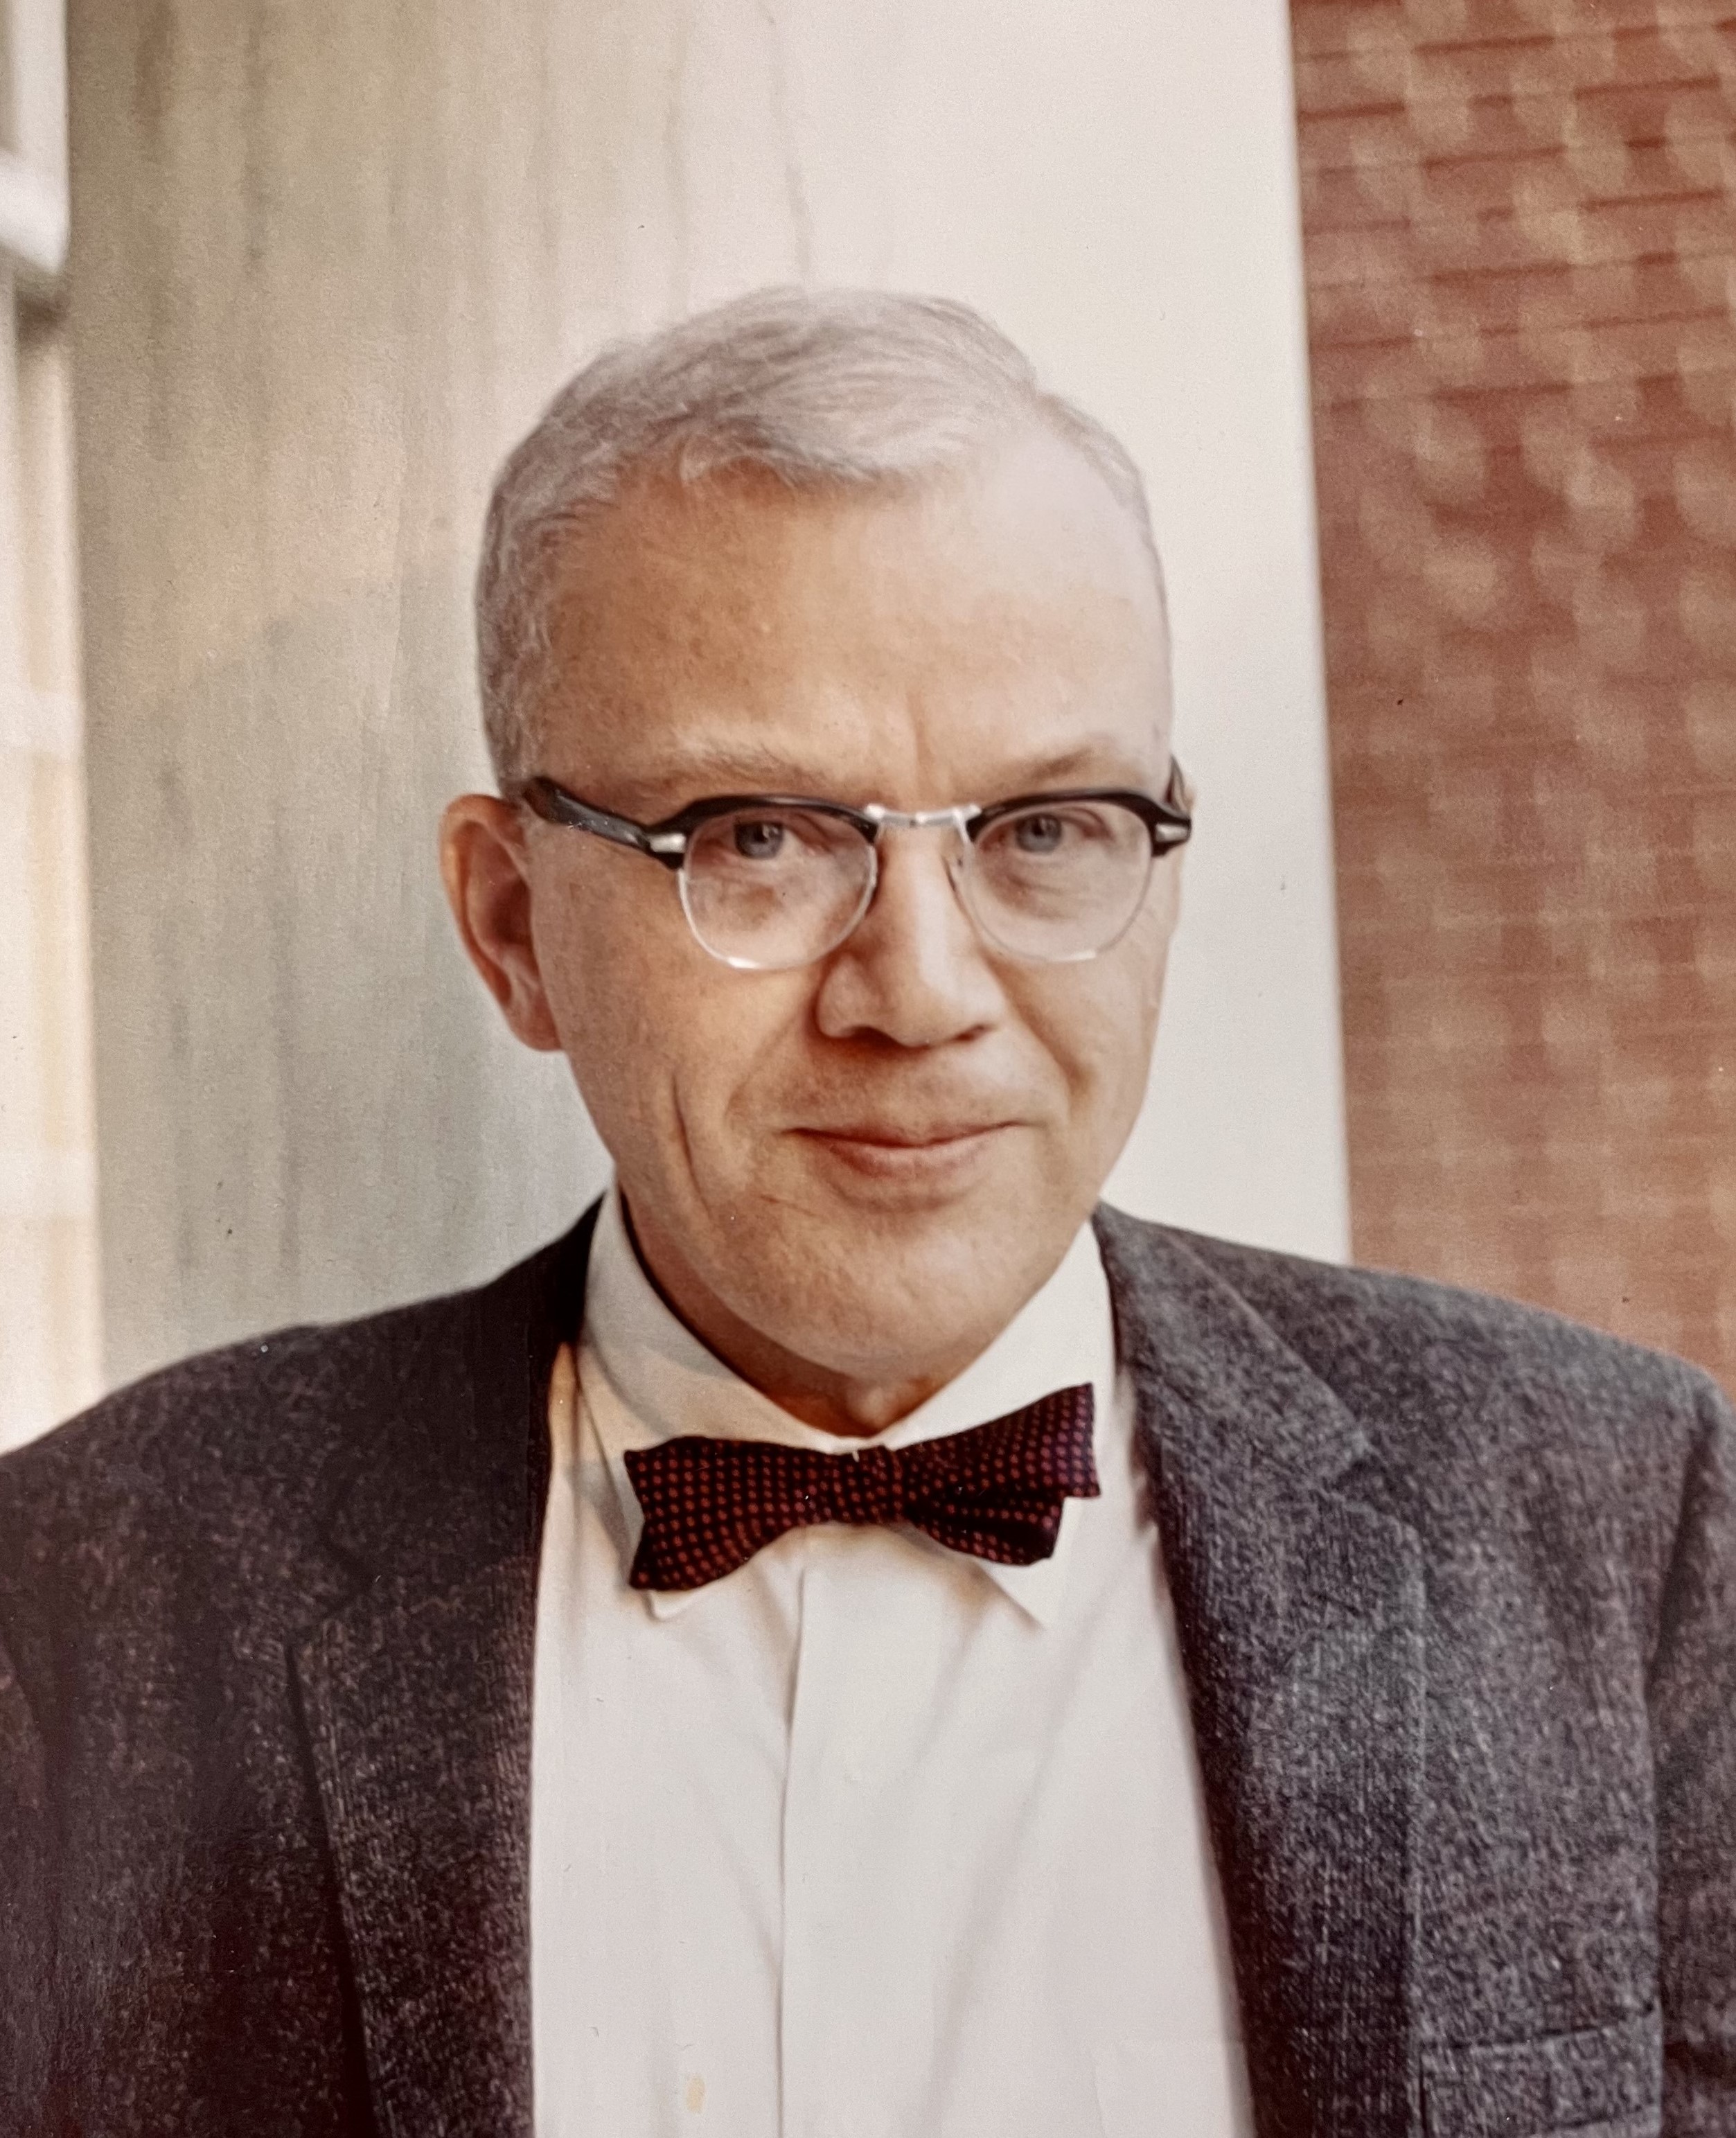 headshot photograph of man with glasses and bow tie